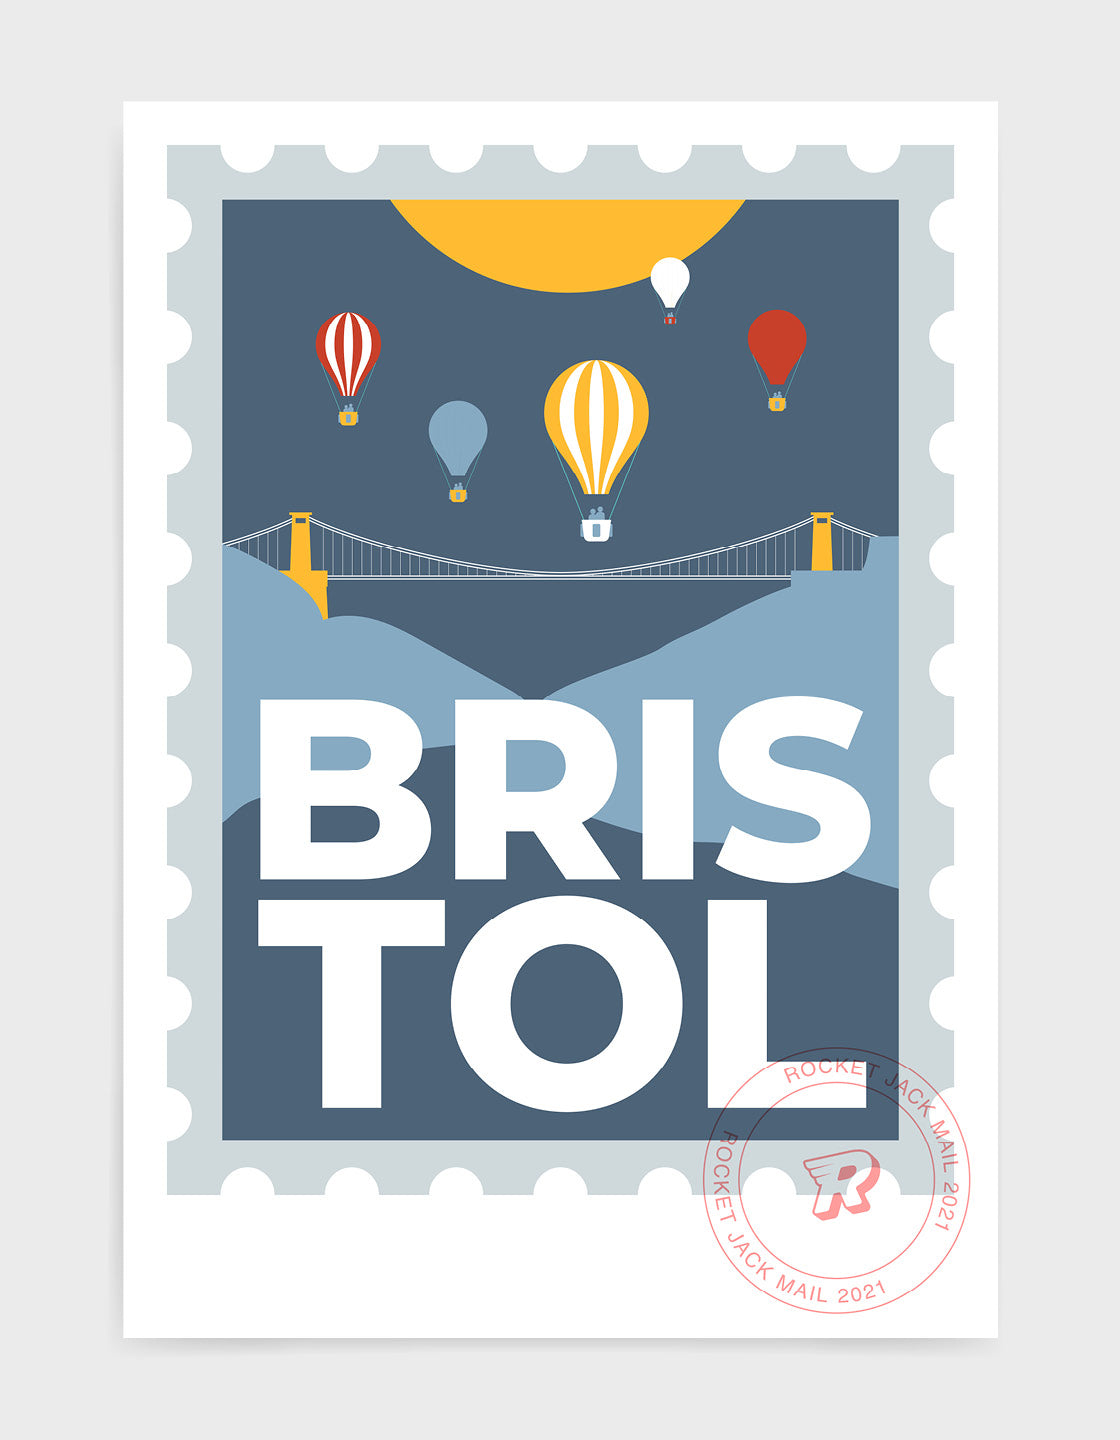 Customisable Bristol stamp print featuring the suspension bridge and hot air balloons against a grey & yellow background